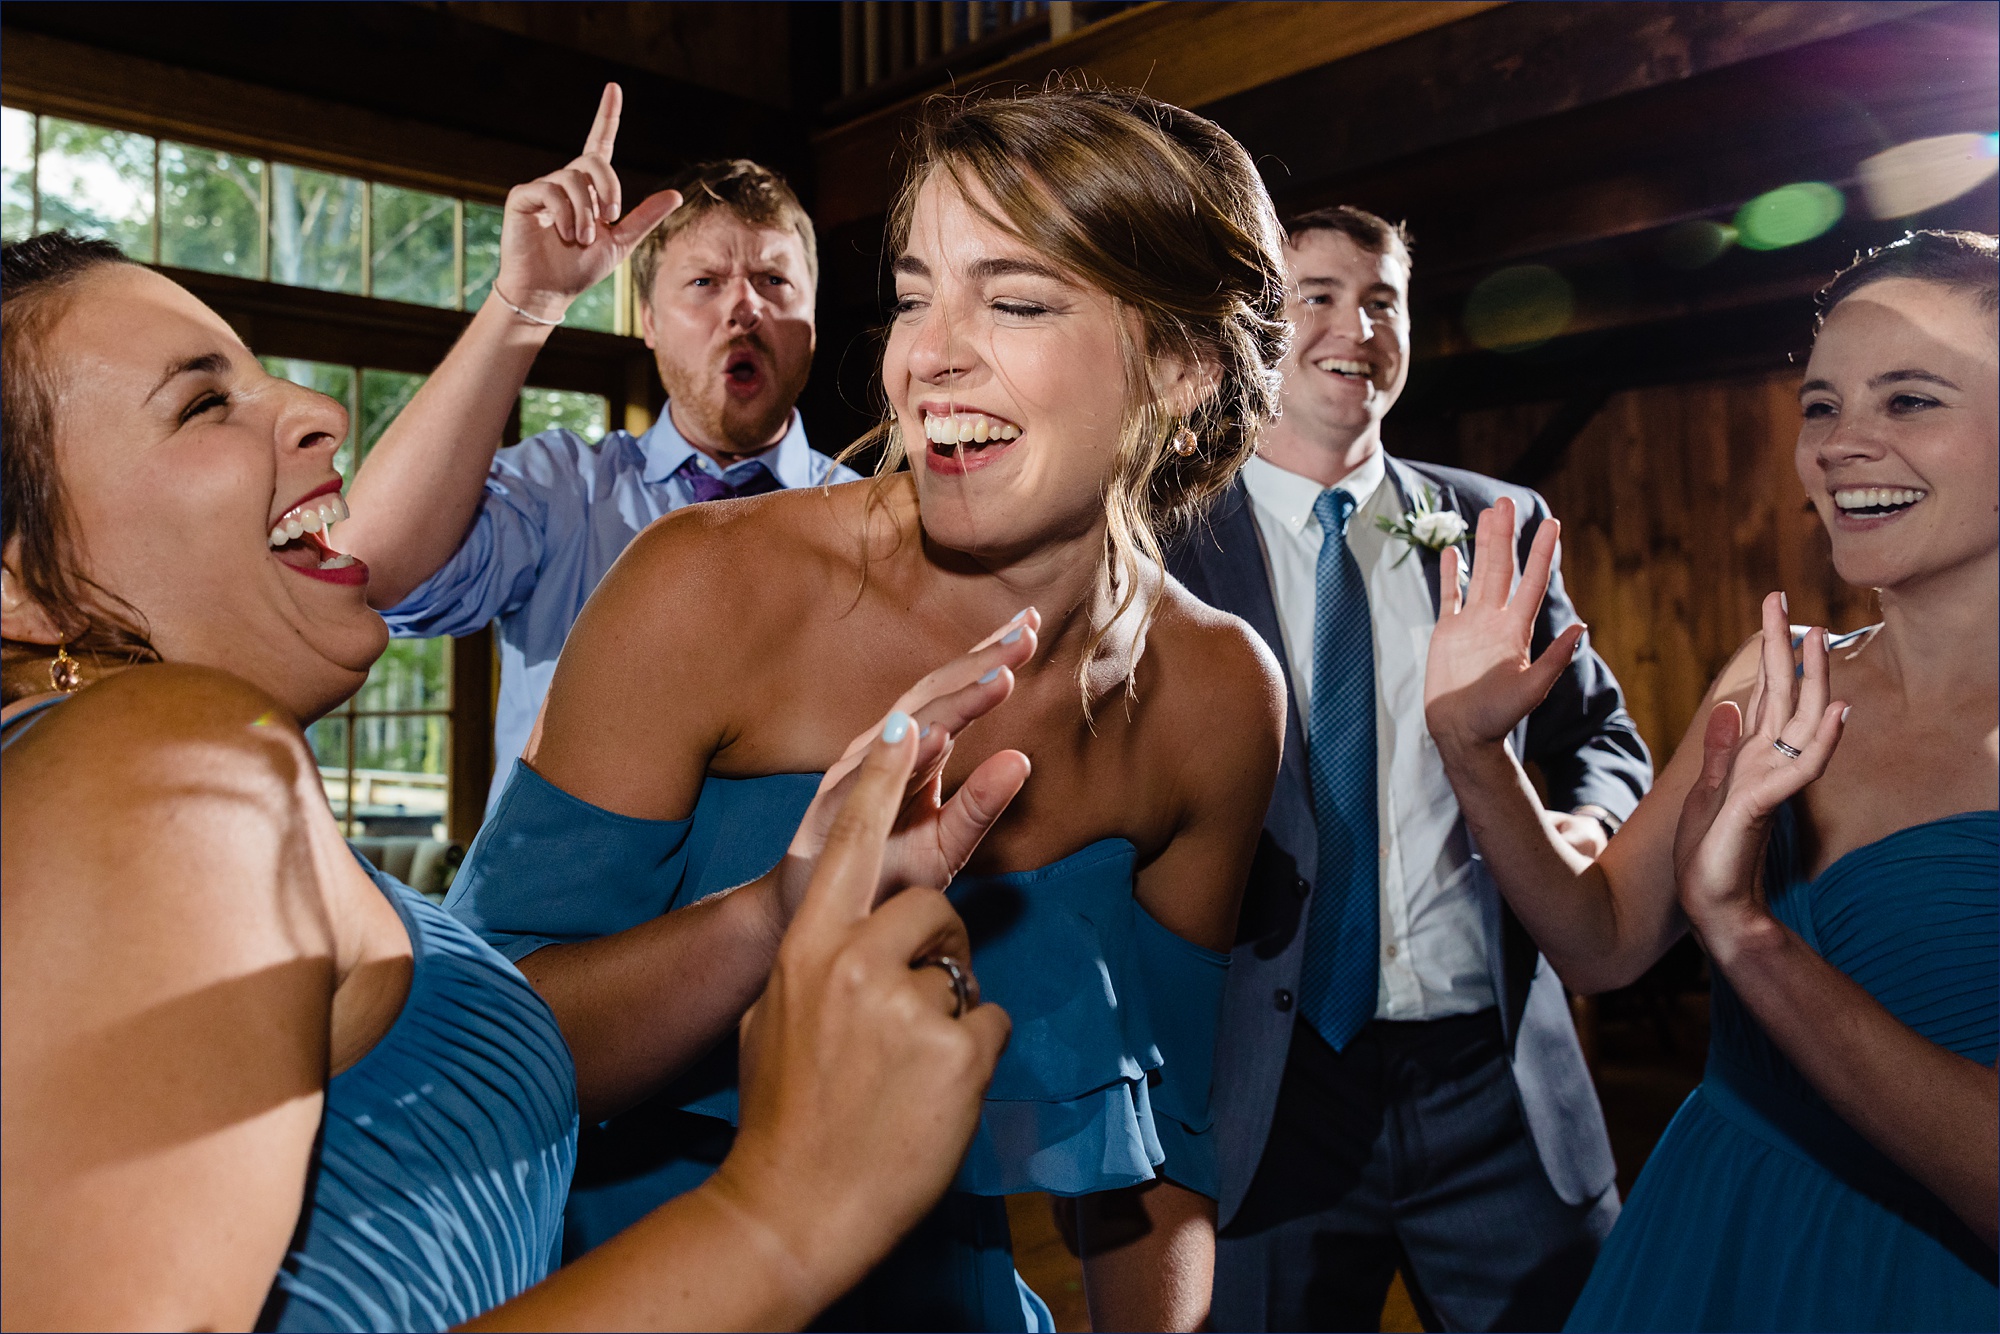 Wedding guests dance in the barn for the New Hampshire wedding